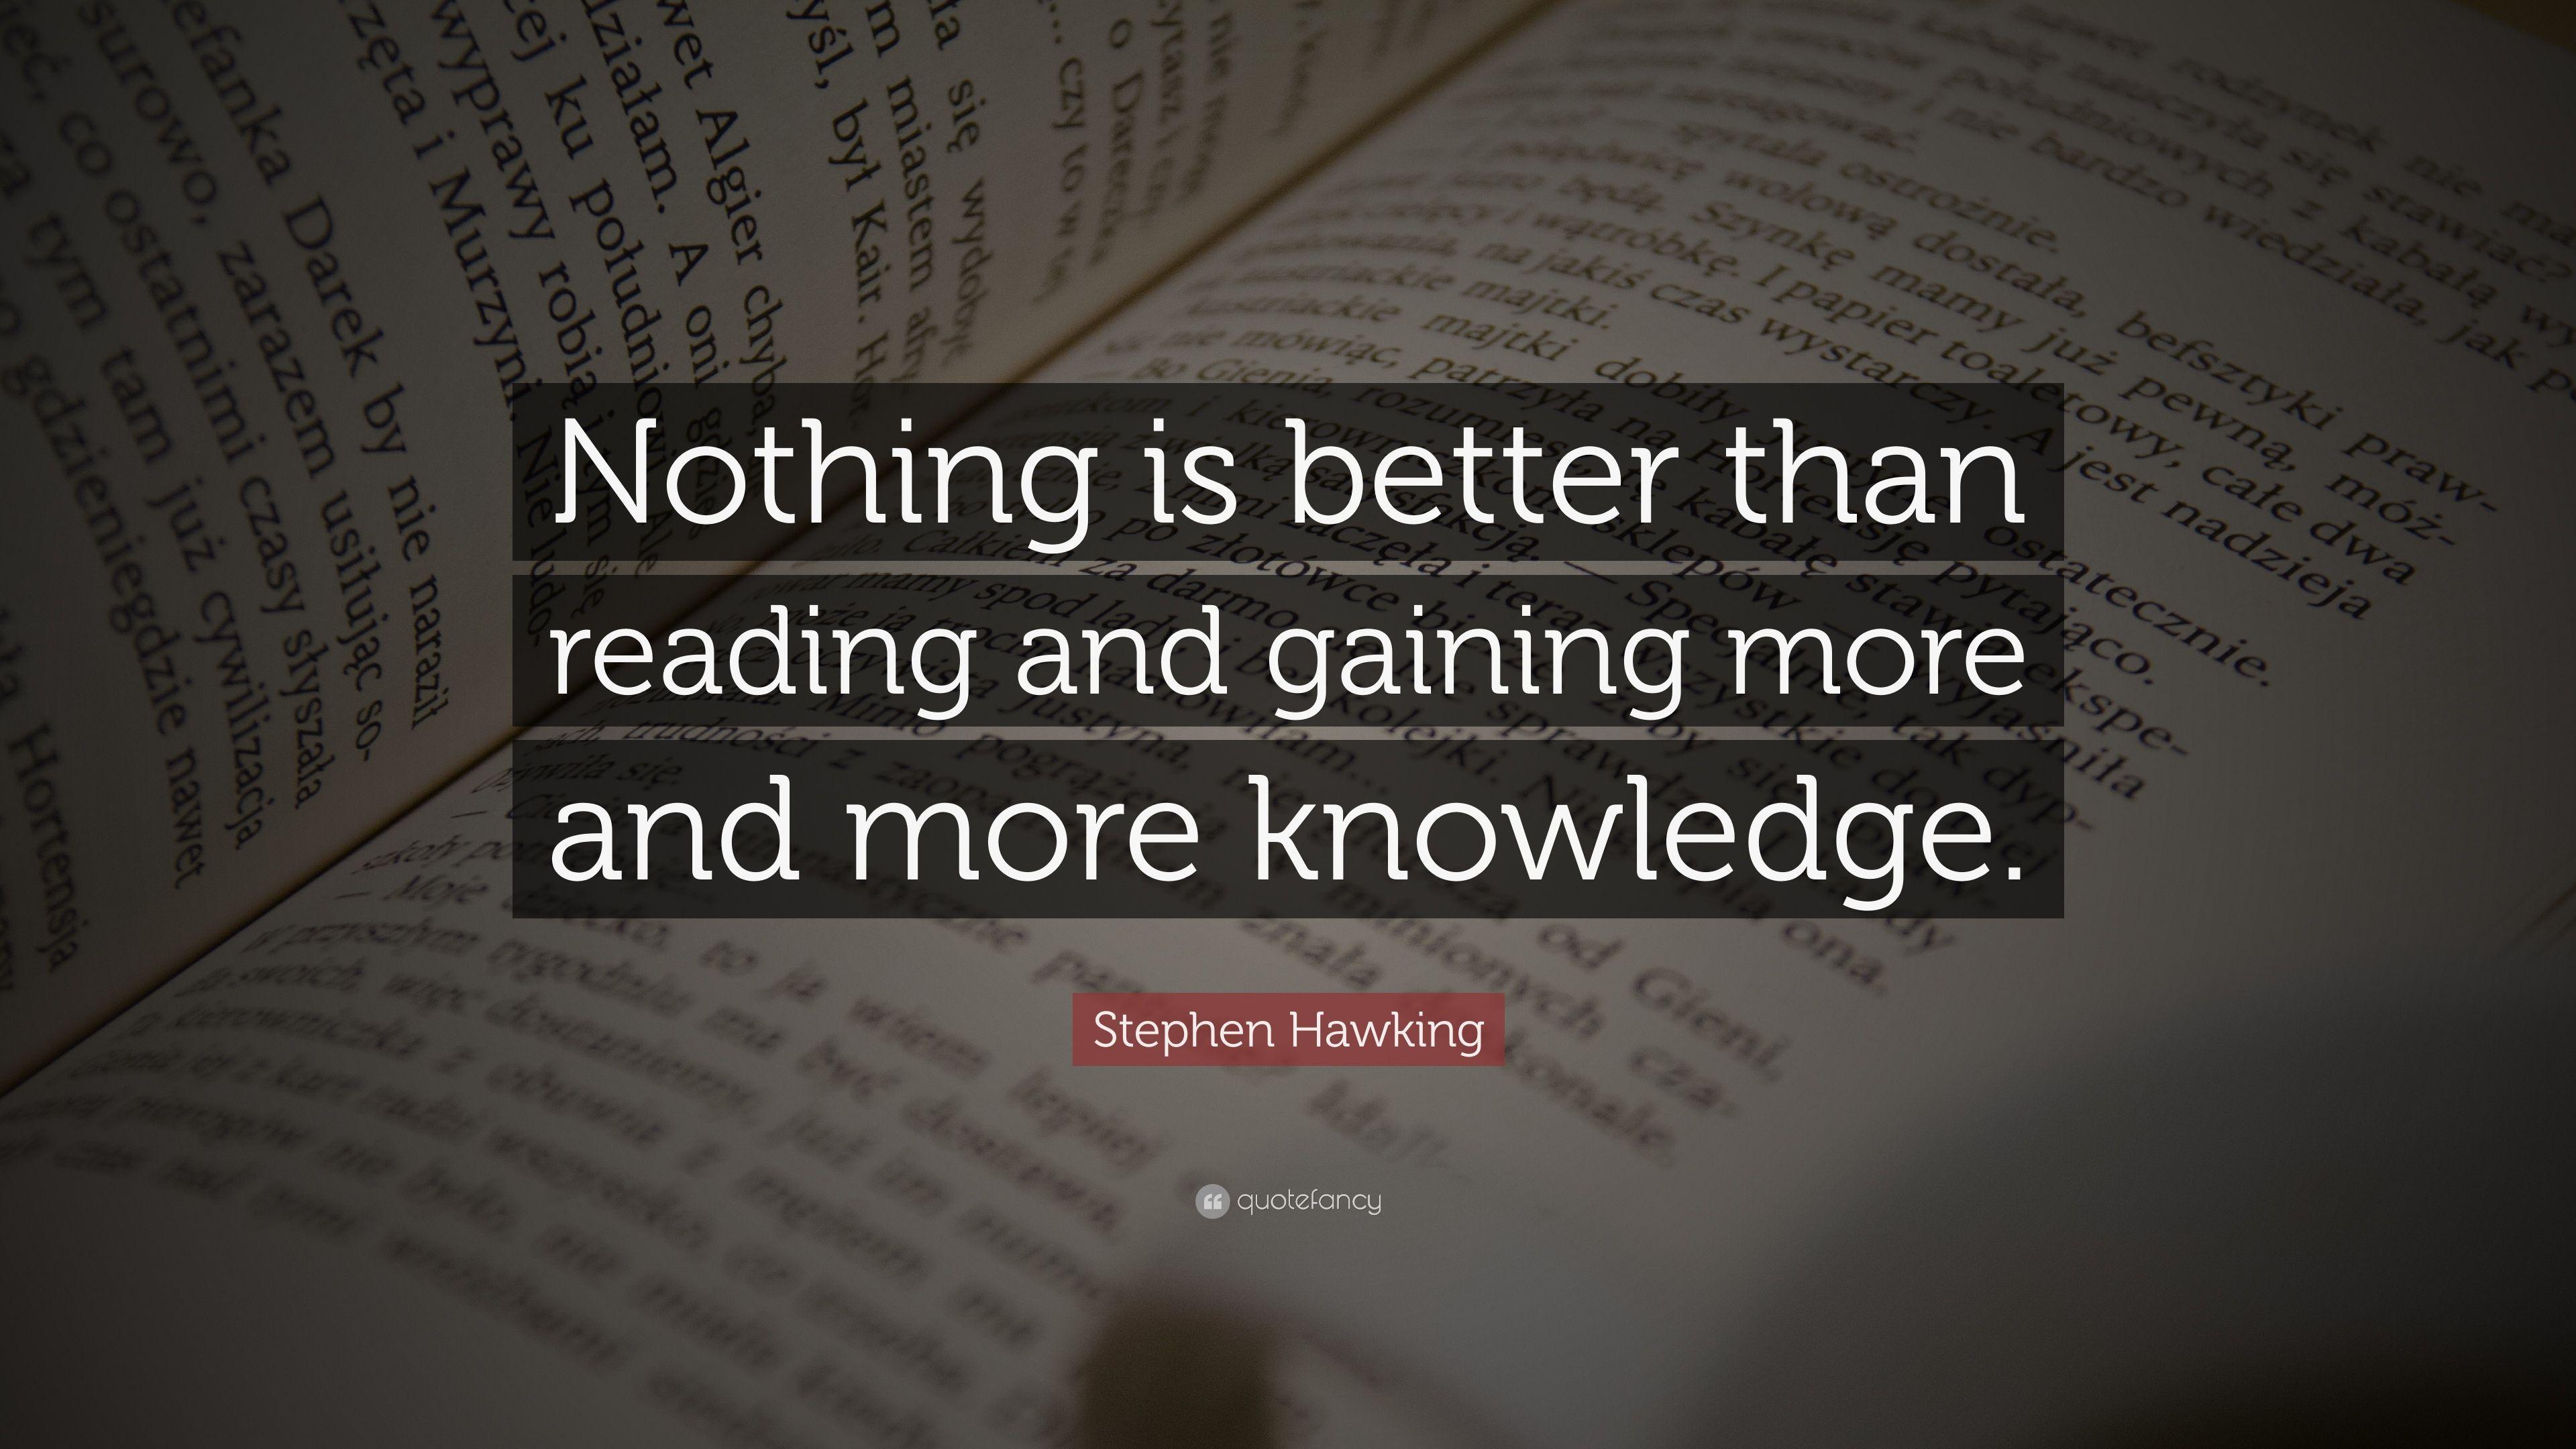 Stephen Hawking Quote: “Nothing is better than reading and gaining